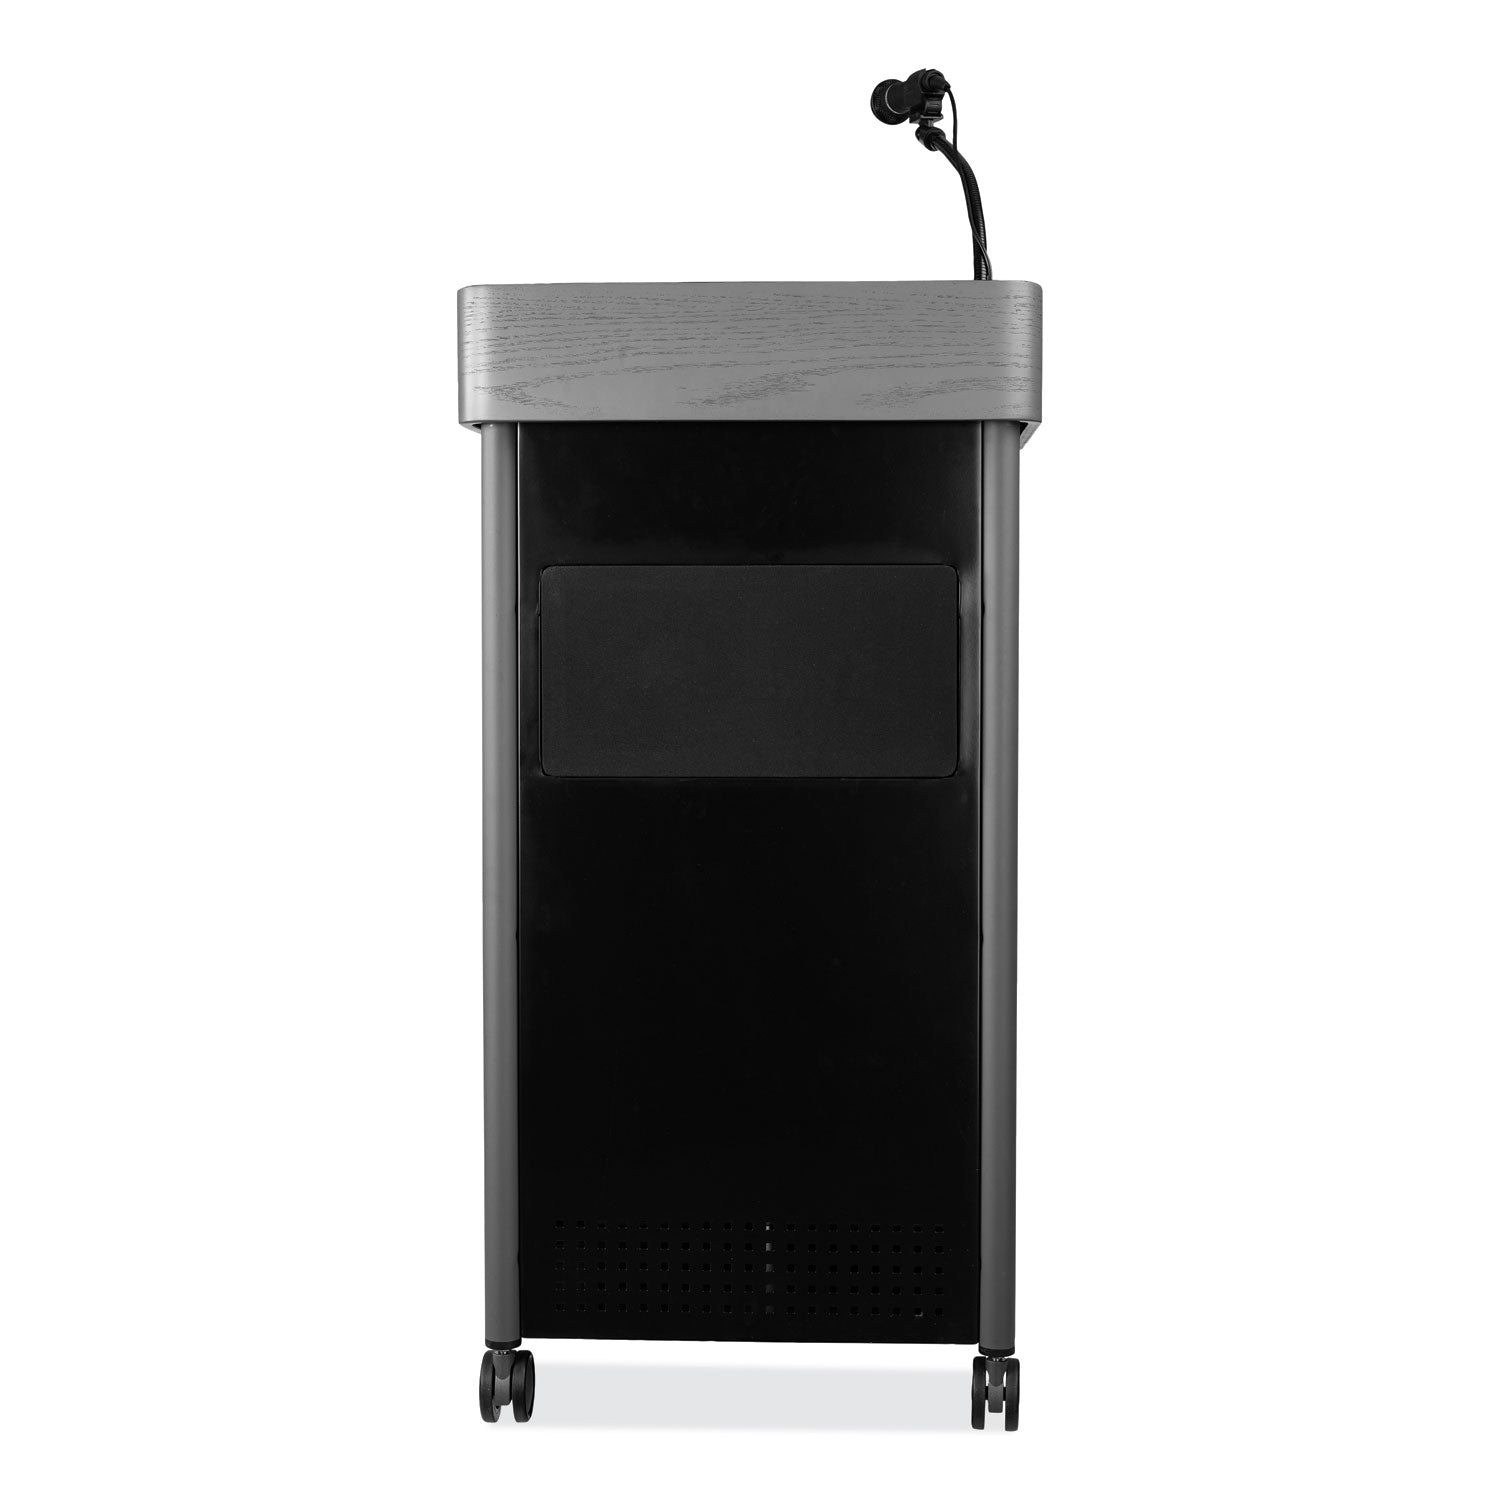 greystone-lectern-with-sound-235-x-1925-x-455-charcoal-gray-ships-in-1-3-business-days_npsgsls - 2